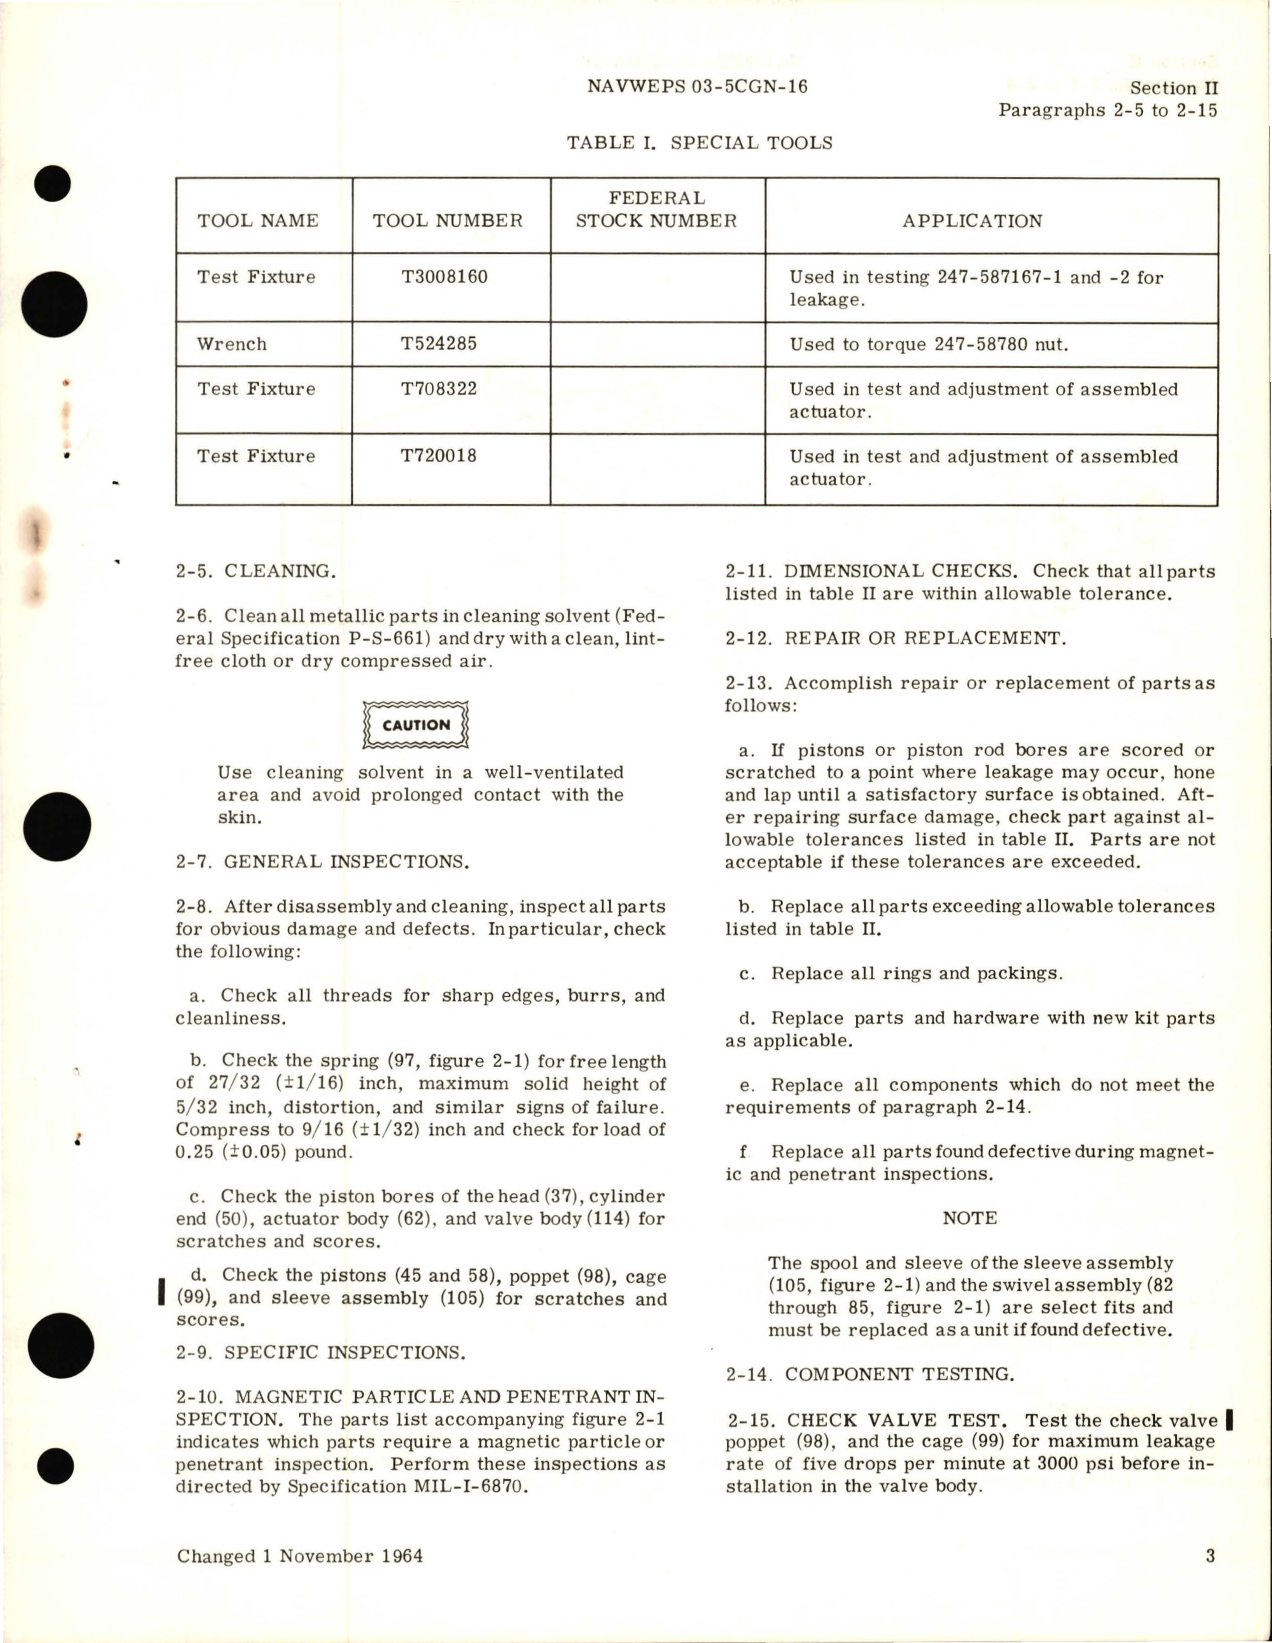 Sample page 5 from AirCorps Library document: Overhaul Instructions for Hydraulic Lateral Control Outboard and Center Actuator Assemblies Part 247-58703 Series 